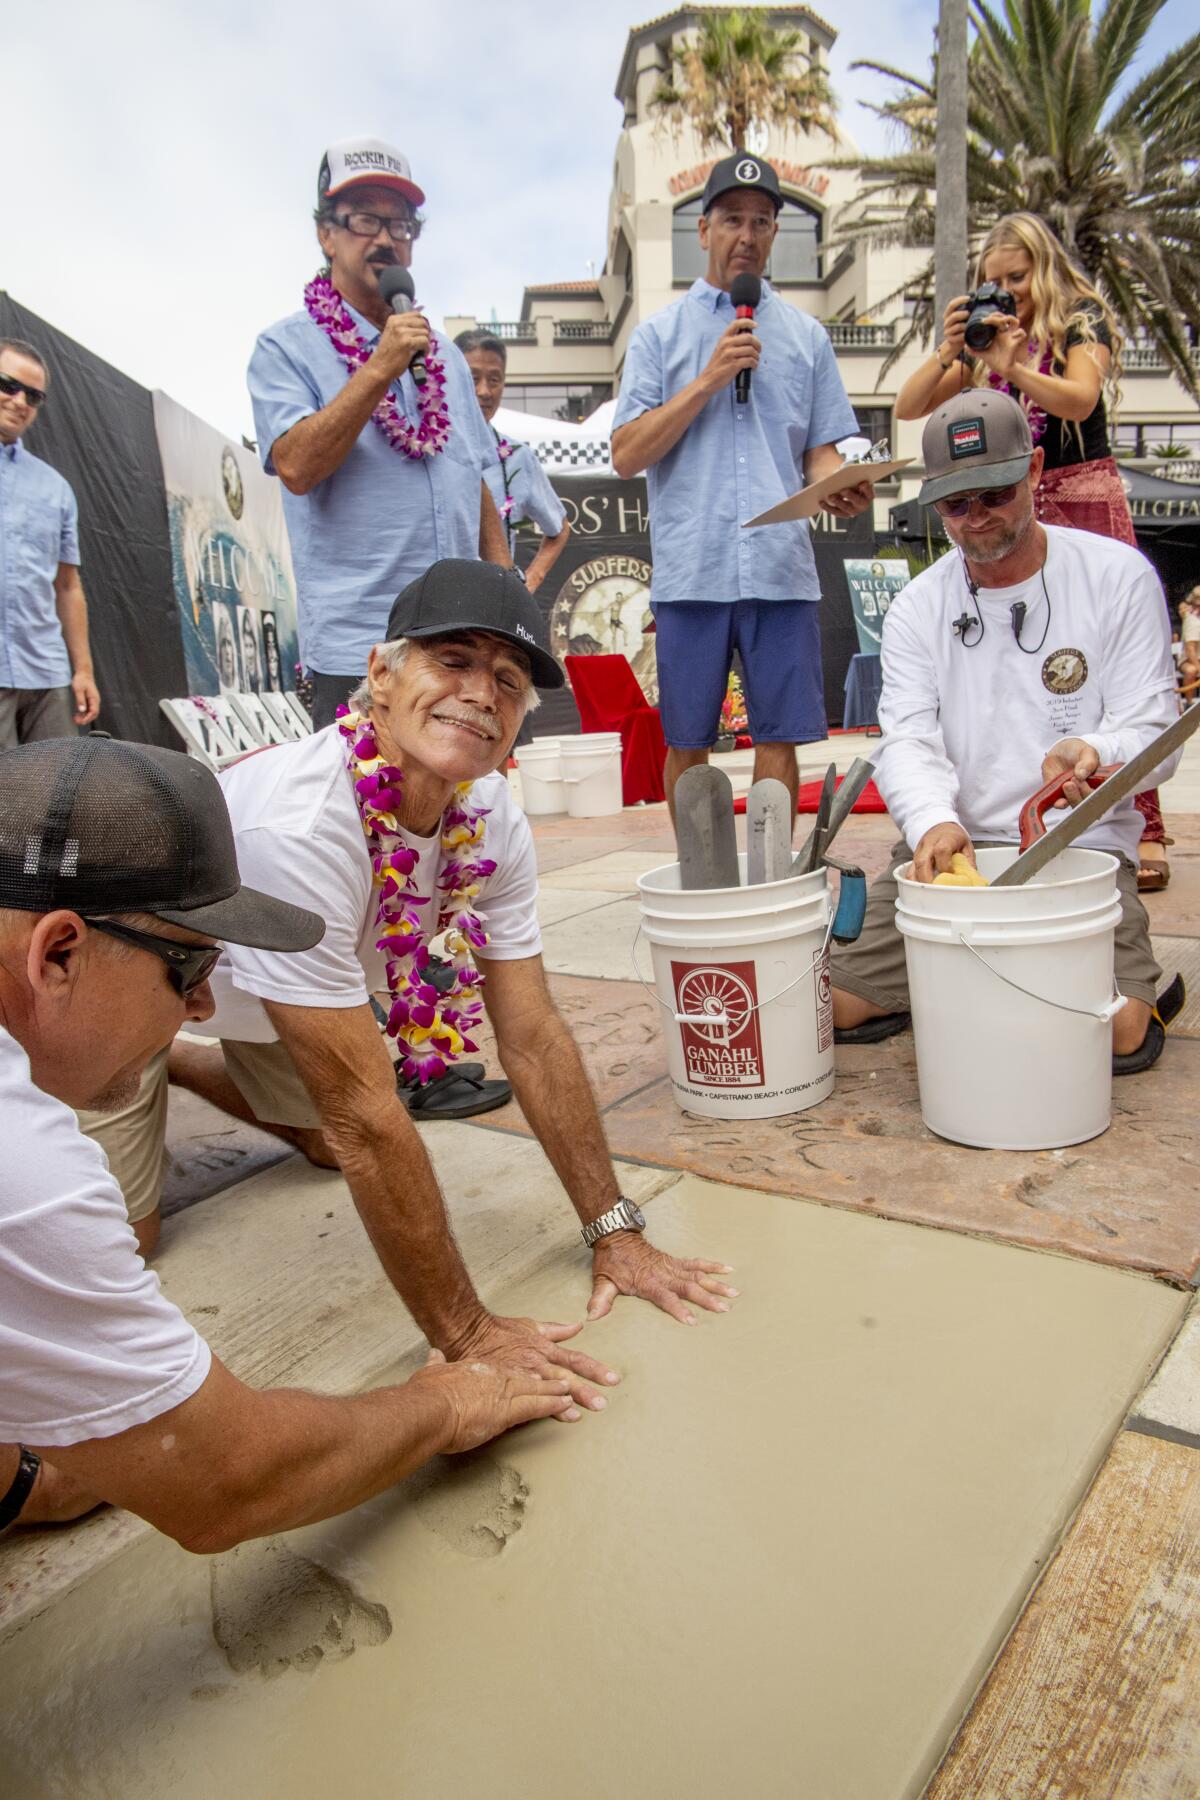 Sam Hawk, a surfer and surfboard shaper, plants his handprints in wet cement Friday during his induction into the Surfers' Hall of Fame in front of Huntington Surf and Sport on Main Street in Huntington Beach.